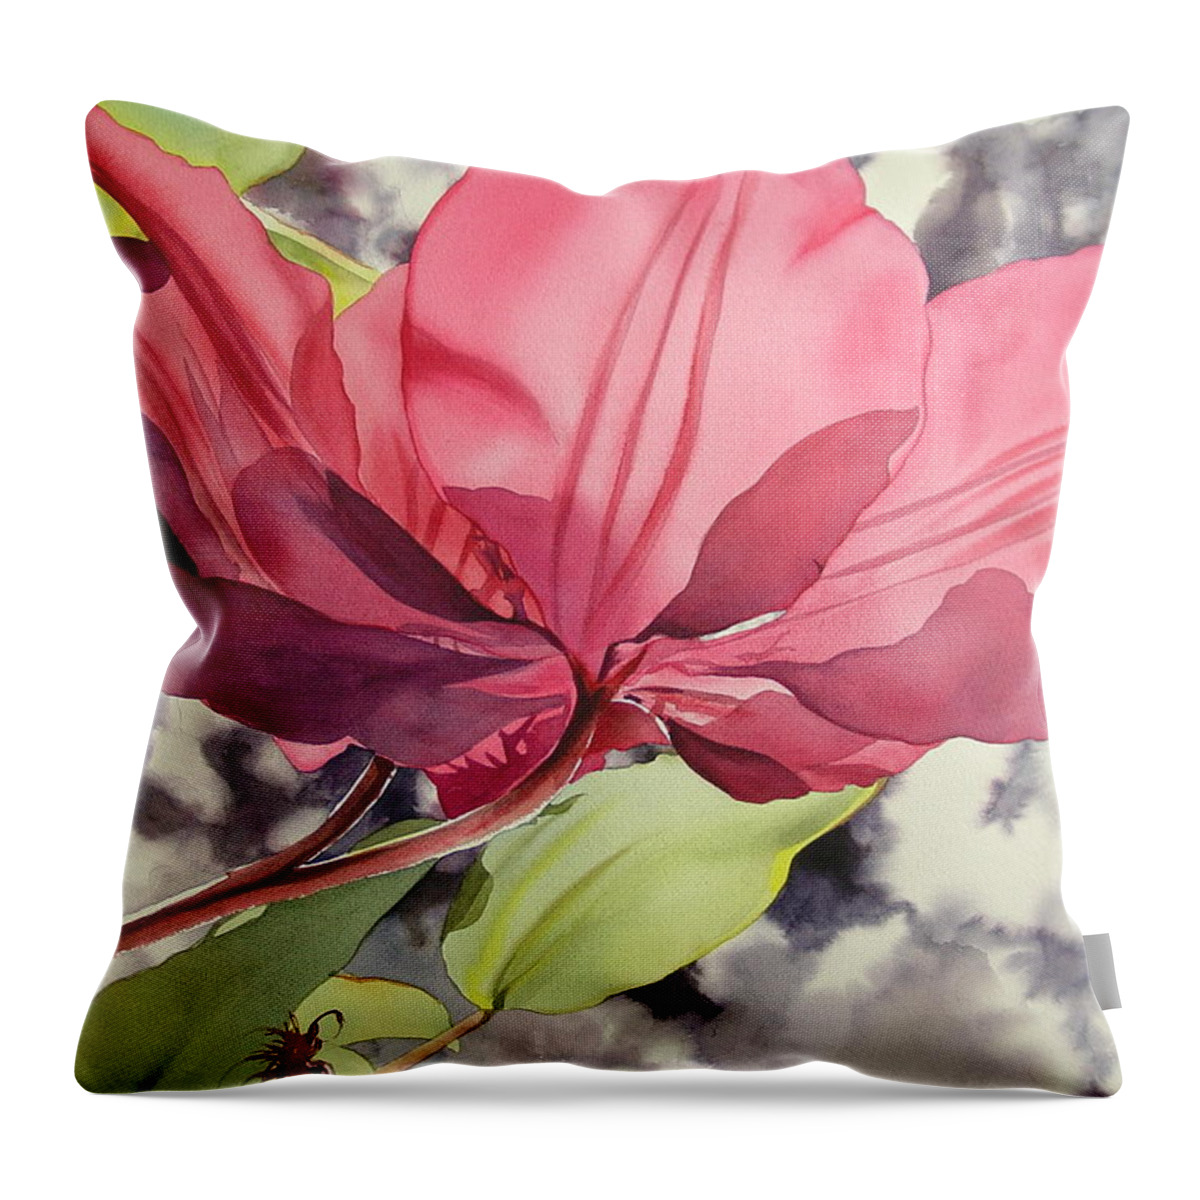 Watercolor Throw Pillow featuring the photograph Clematis by Marlene Gremillion